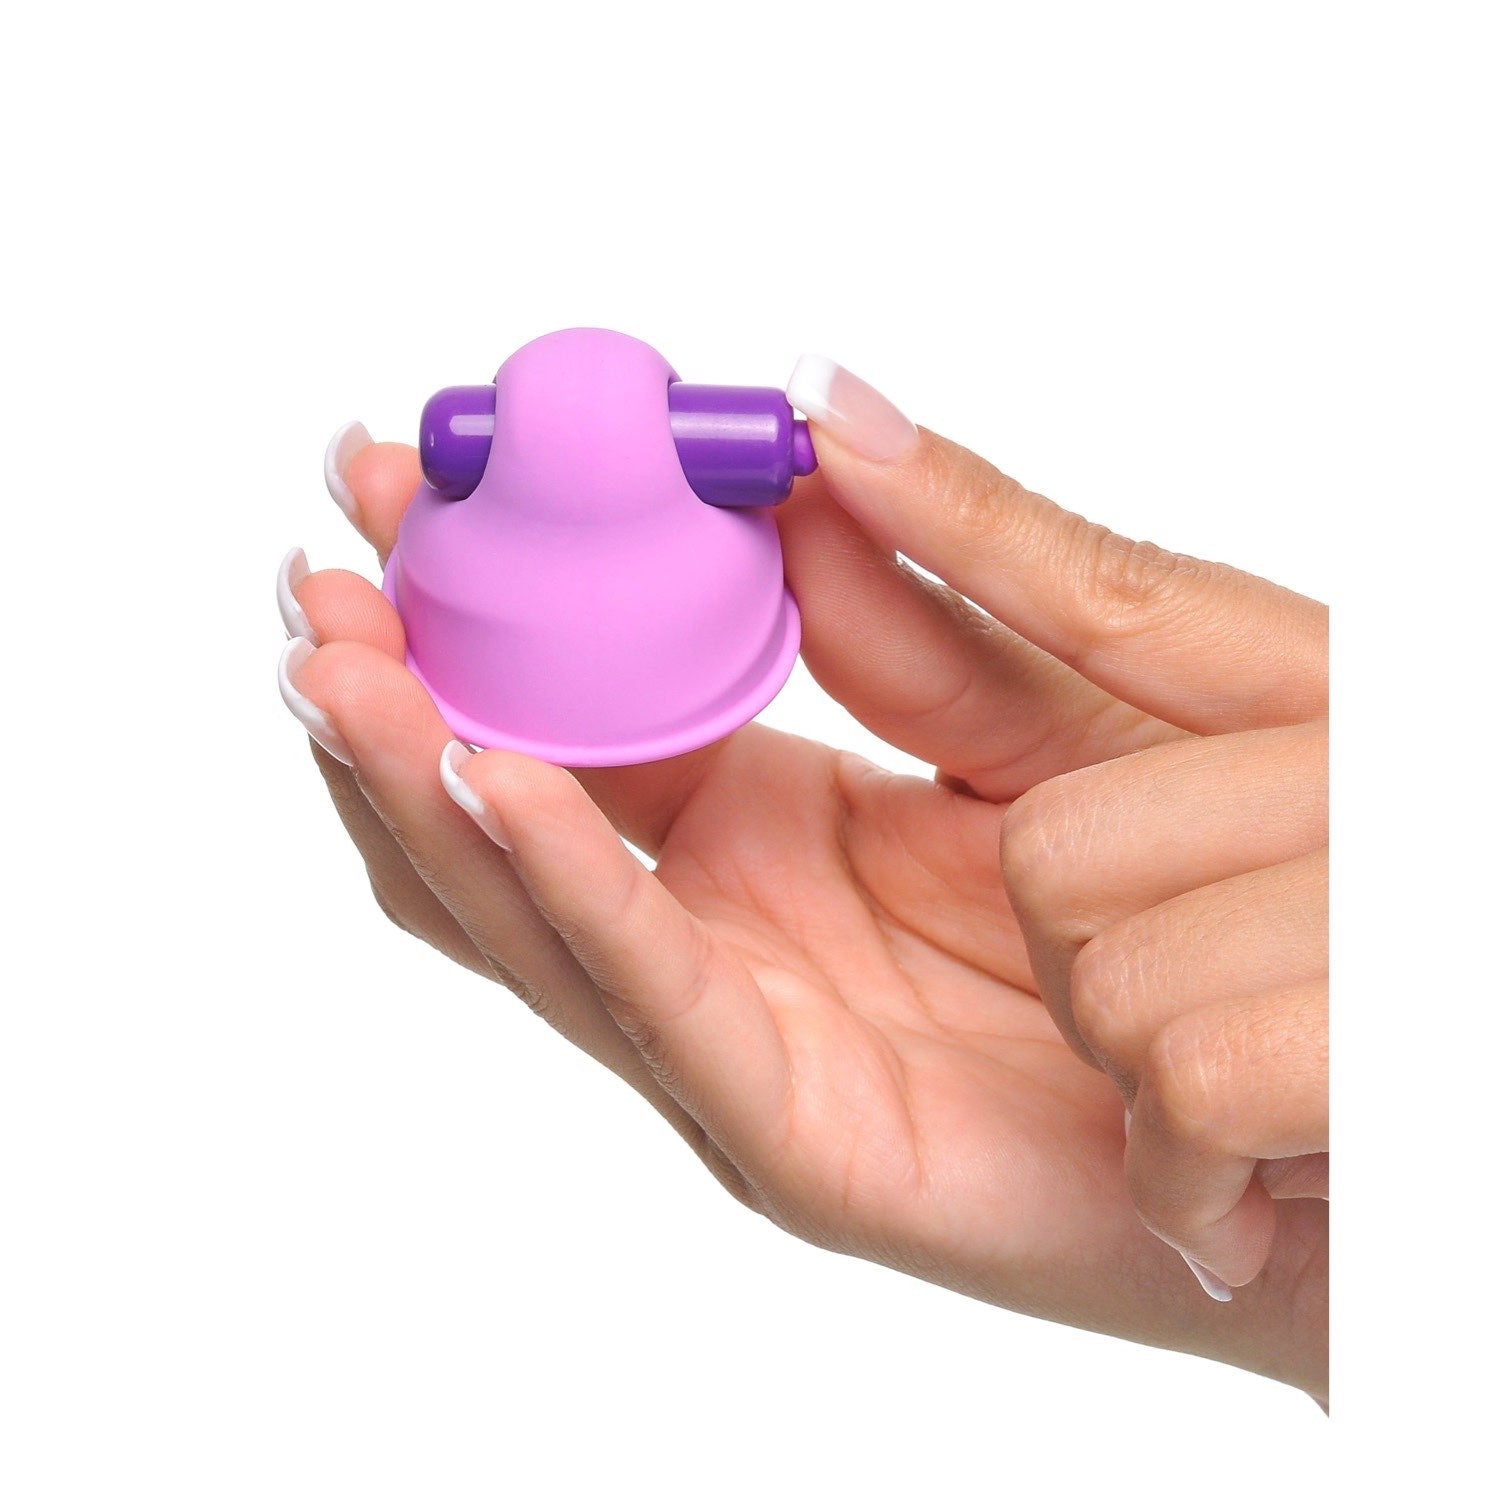 Fantasy For Her Vibrating Nipple Suck-Hers - Purple 5 cm Vibrating Nipple Suckers - Set of 2 by Pipedream